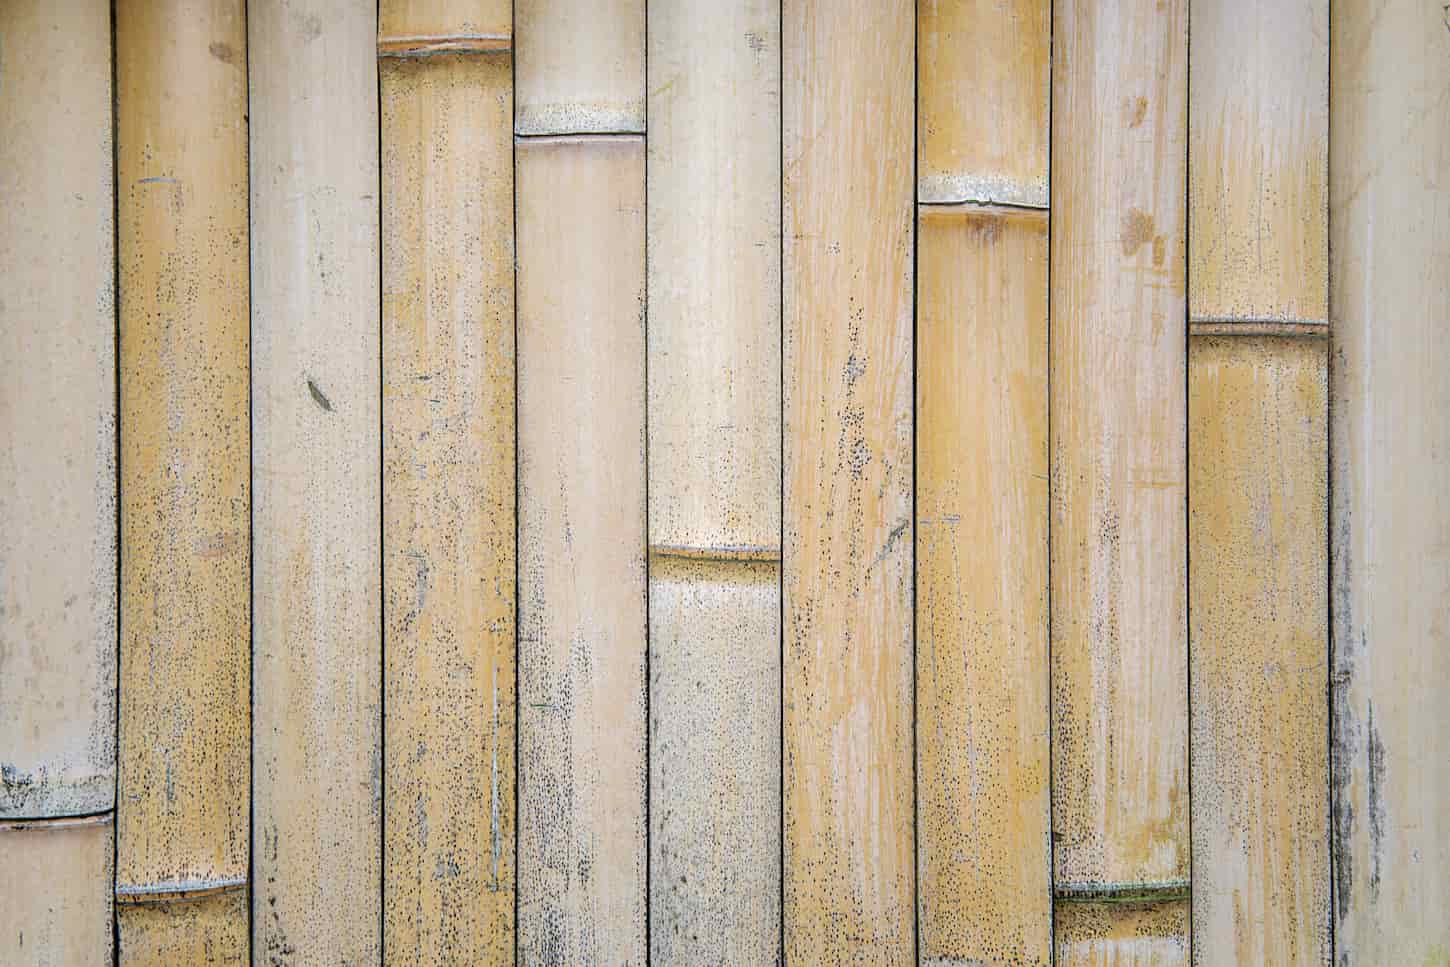 An image of a Closeup view of detail from the bamboo fence.